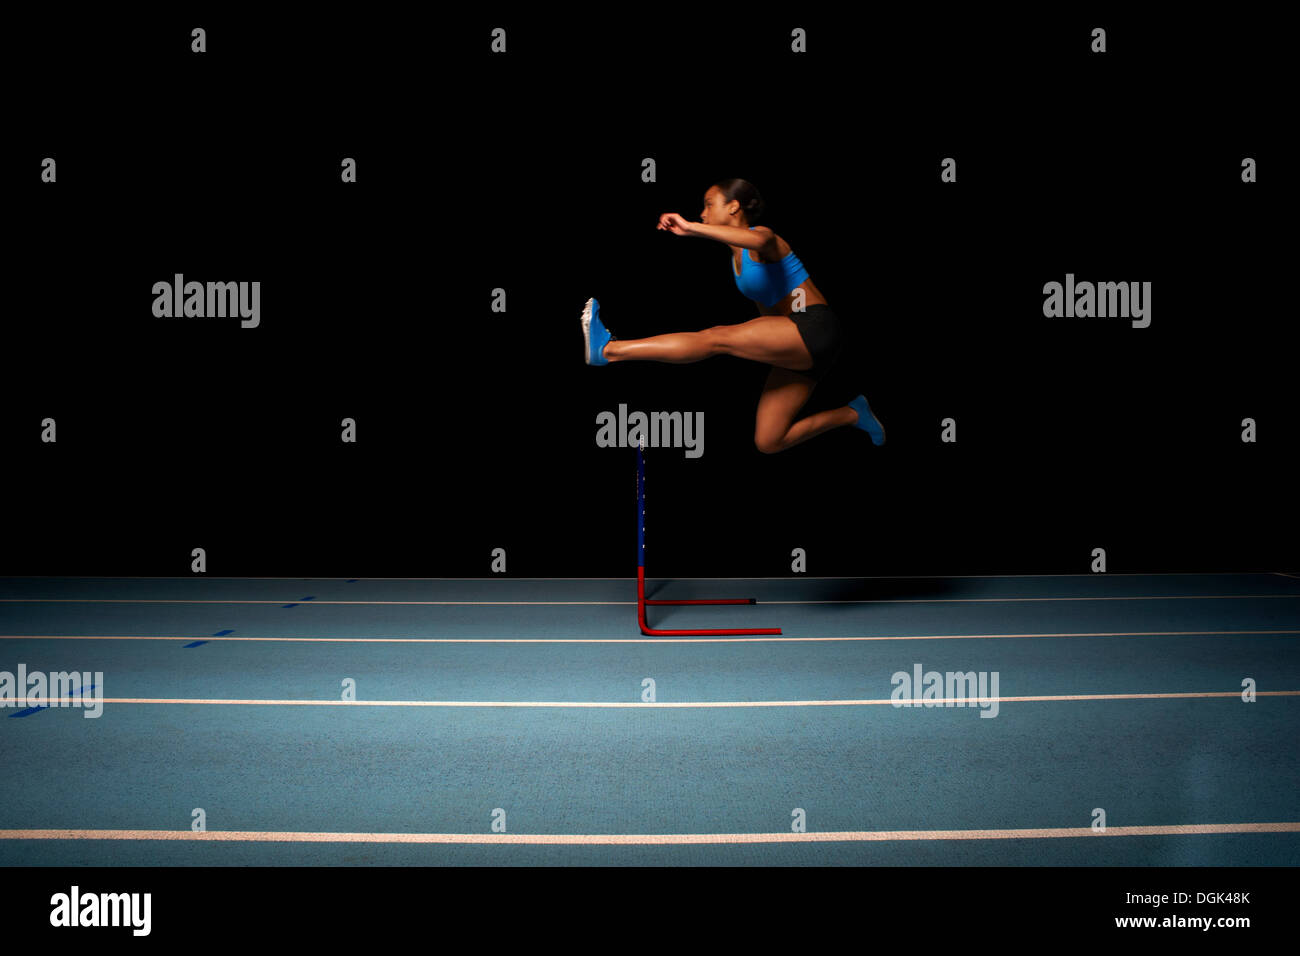 Young female athlete jumping hurdle Stock Photo